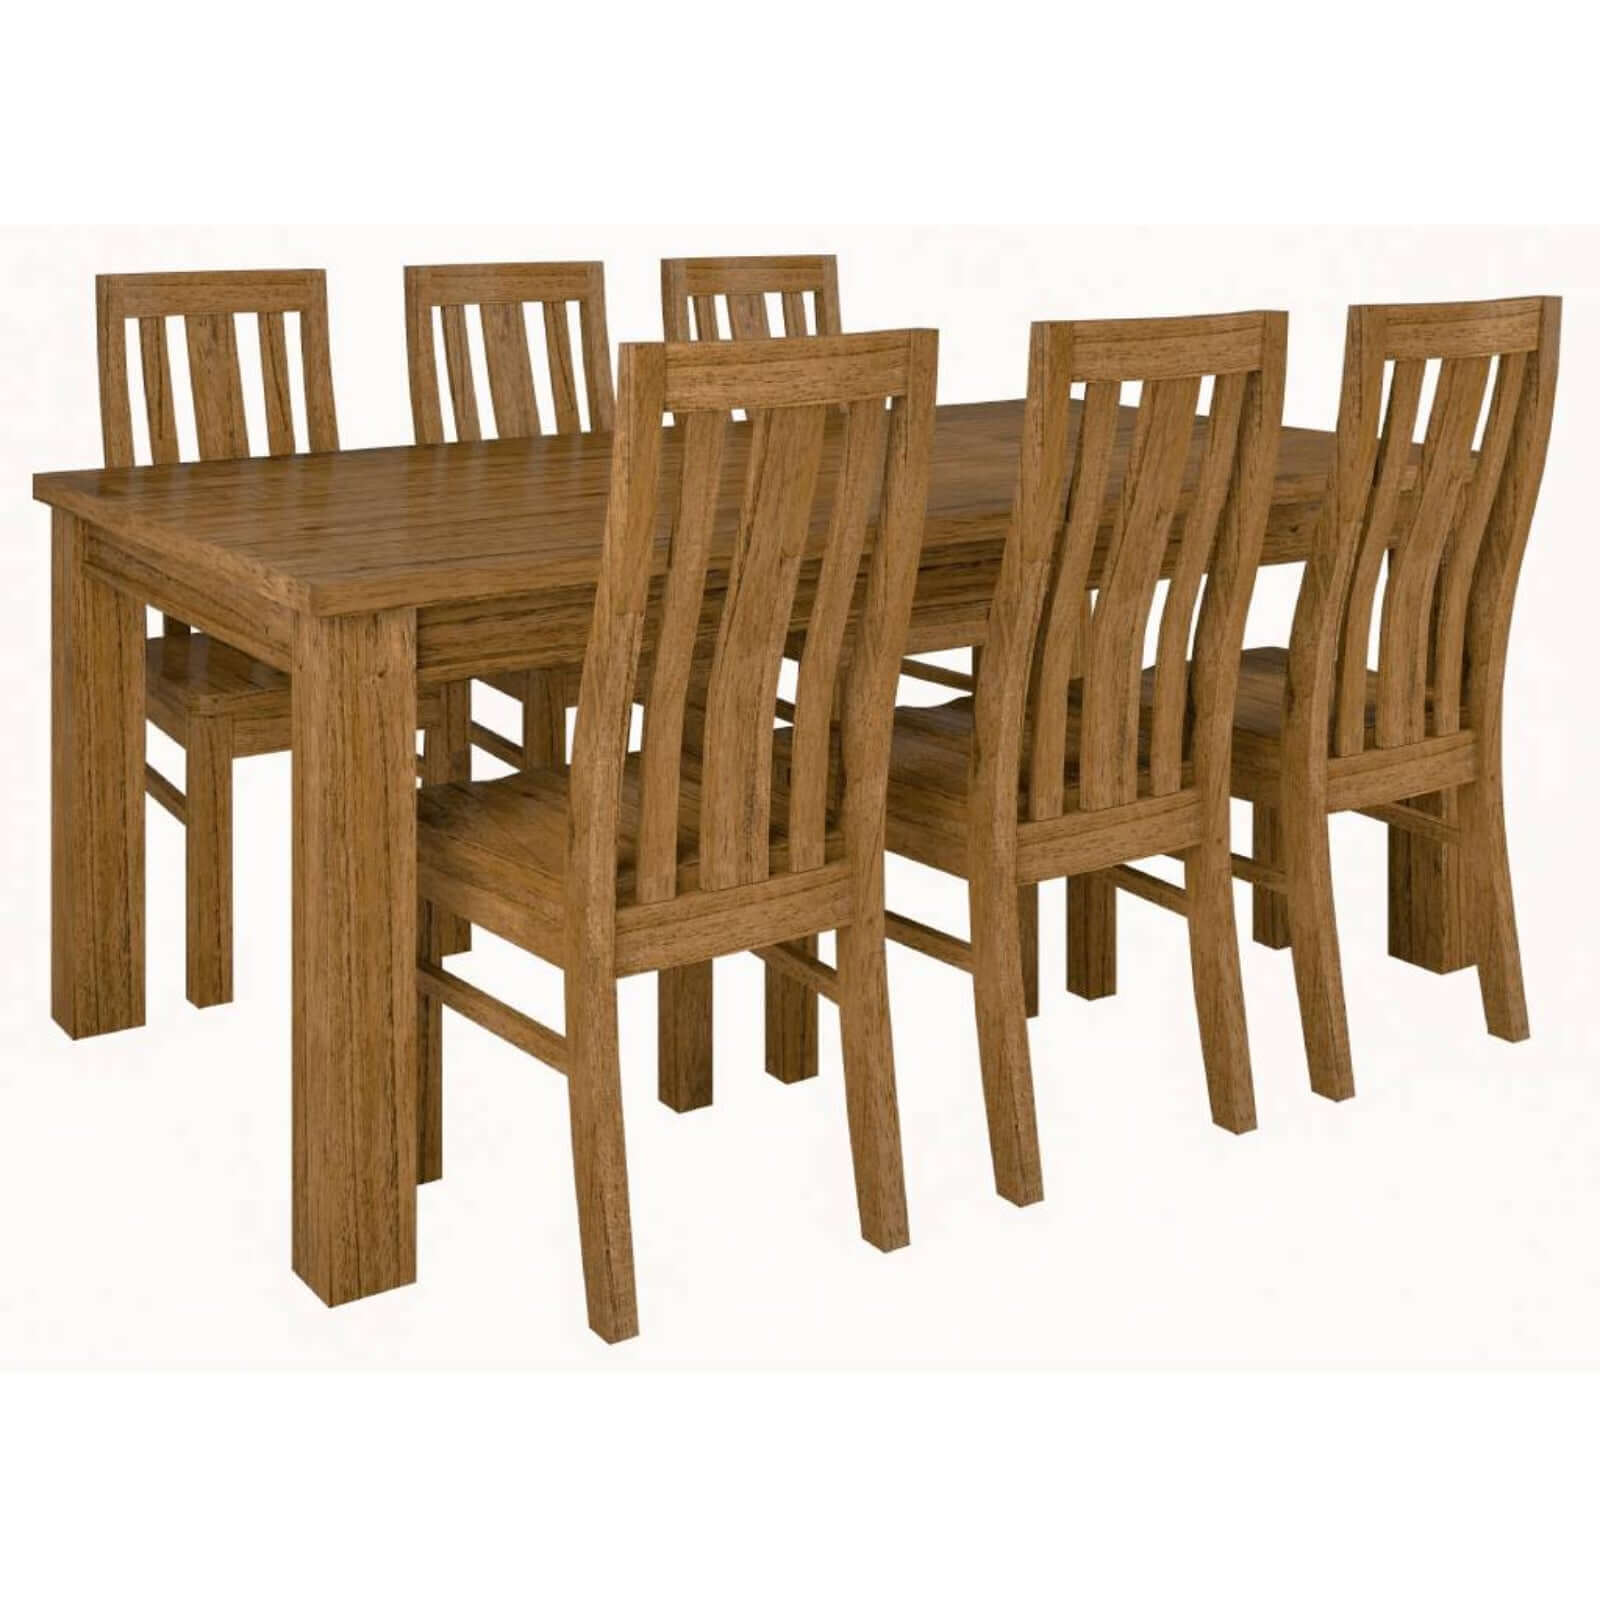 Birdsville 7pc Dining Set 190cm Table 6 Chair Solid Mt Ash Wood Timber - Brown-Upinteriors